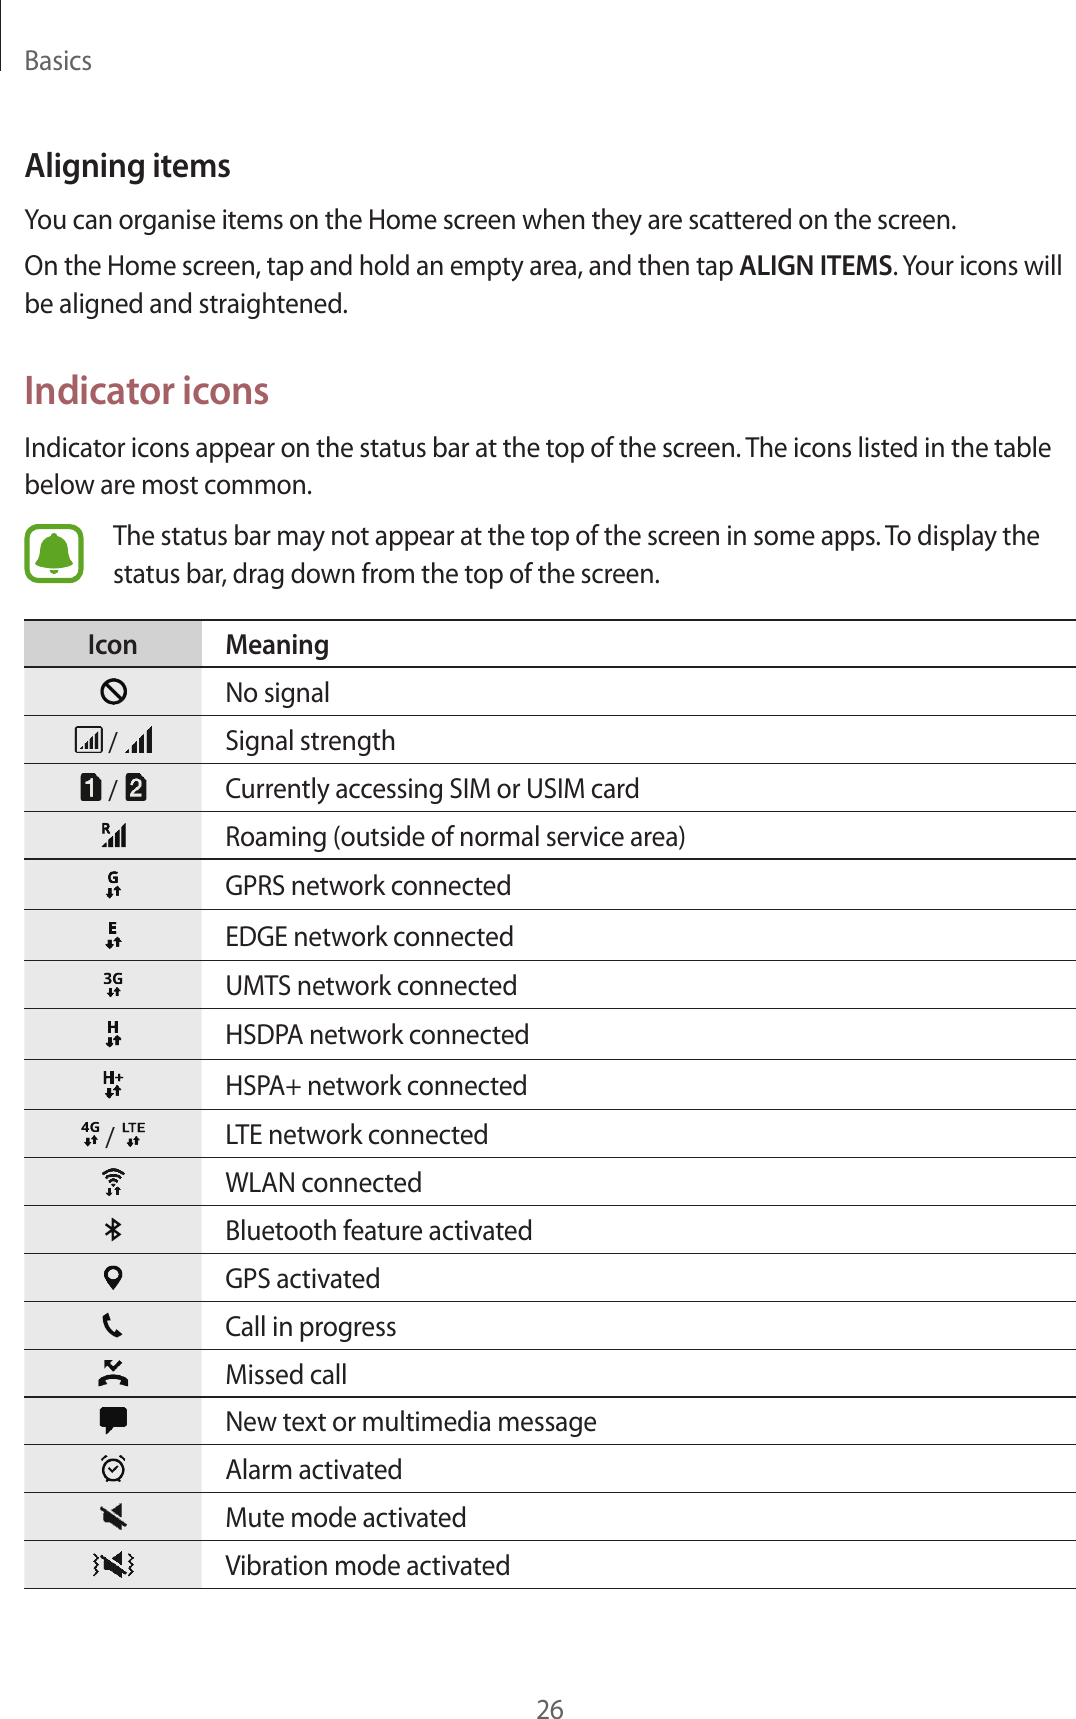 Basics26Aligning itemsYou can organise items on the Home screen when they are scattered on the screen.On the Home screen, tap and hold an empty area, and then tap ALIGN ITEMS. Your icons will be aligned and straightened.Indicator iconsIndicator icons appear on the status bar at the top of the screen. The icons listed in the table below are most common.The status bar may not appear at the top of the screen in some apps. To display the status bar, drag down from the top of the screen.Icon MeaningNo signal /  Signal strength /  Currently accessing SIM or USIM cardRoaming (outside of normal service area)GPRS network connectedEDGE network connectedUMTS network connectedHSDPA network connectedHSPA+ network connected /  LTE network connectedWLAN connectedBluetooth feature activatedGPS activatedCall in progressMissed callNew text or multimedia messageAlarm activatedMute mode activatedVibration mode activated